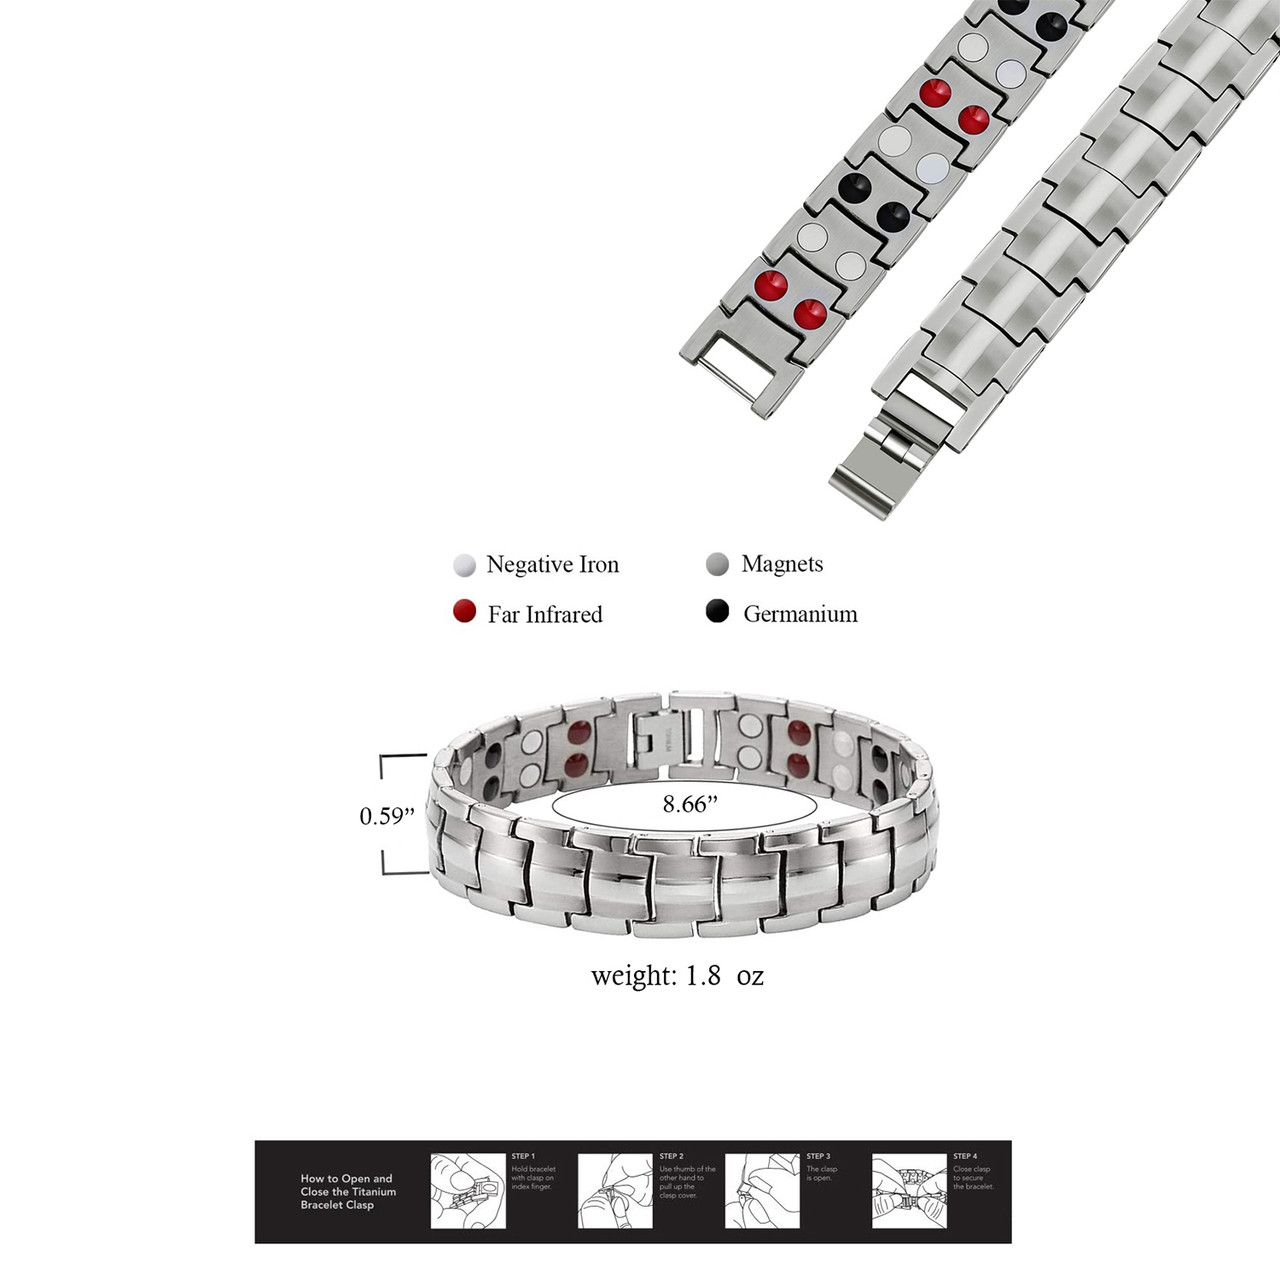 Magnetic Energy Therapy Bracelet for Pain Relief product image